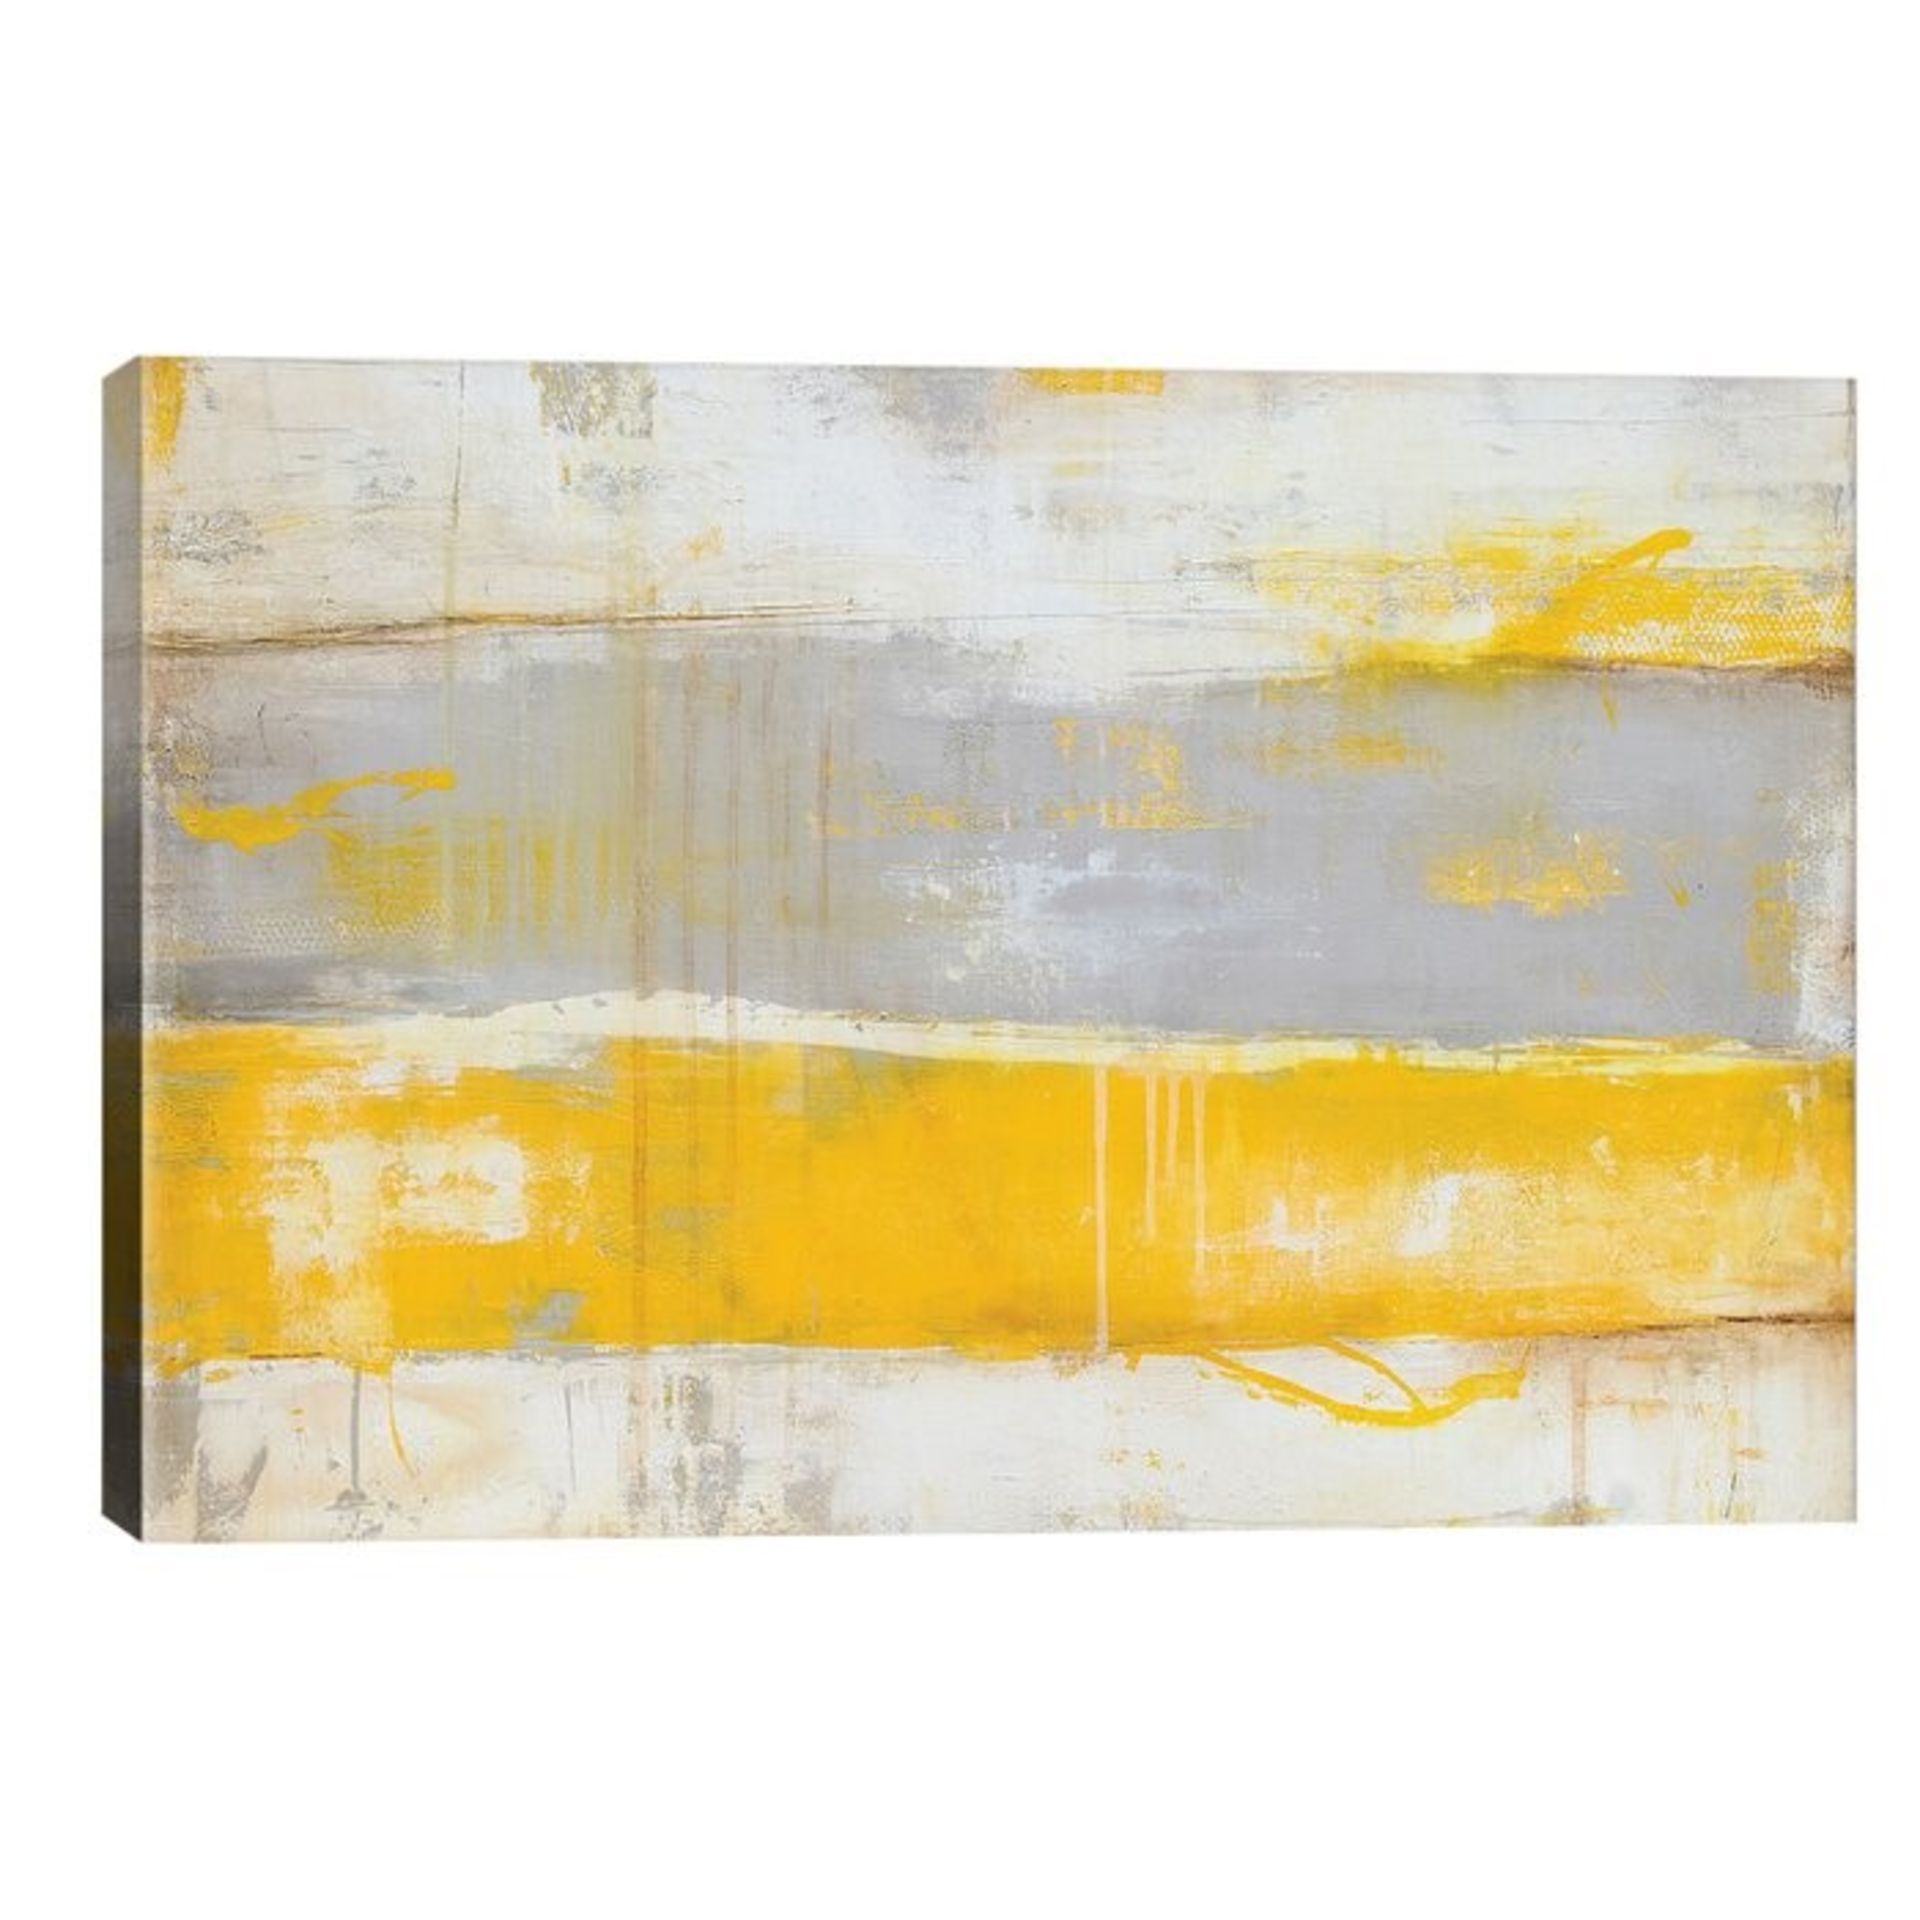 PASSAGES' BY SANA JAMLANEY - WRAPPED CANVAS PAINTING PRINT BY EBERN DESIGNS